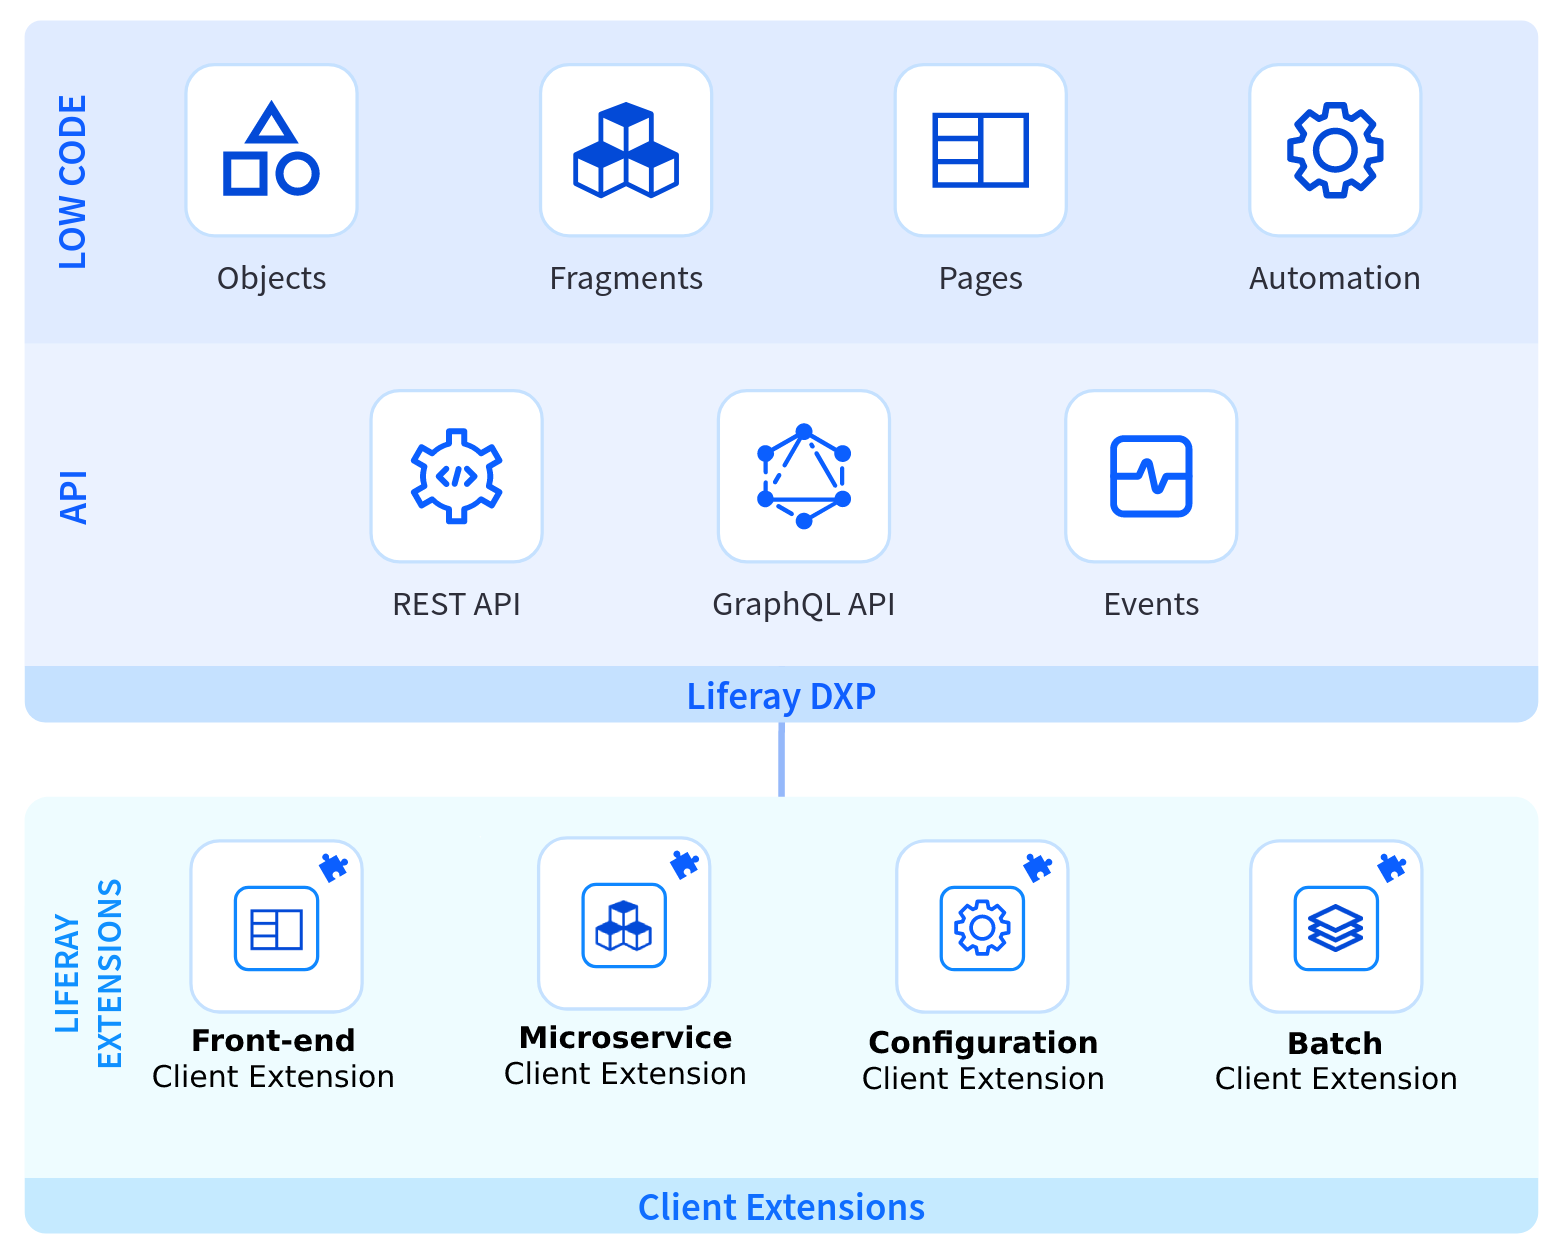 New Application Layer with Client Extensions